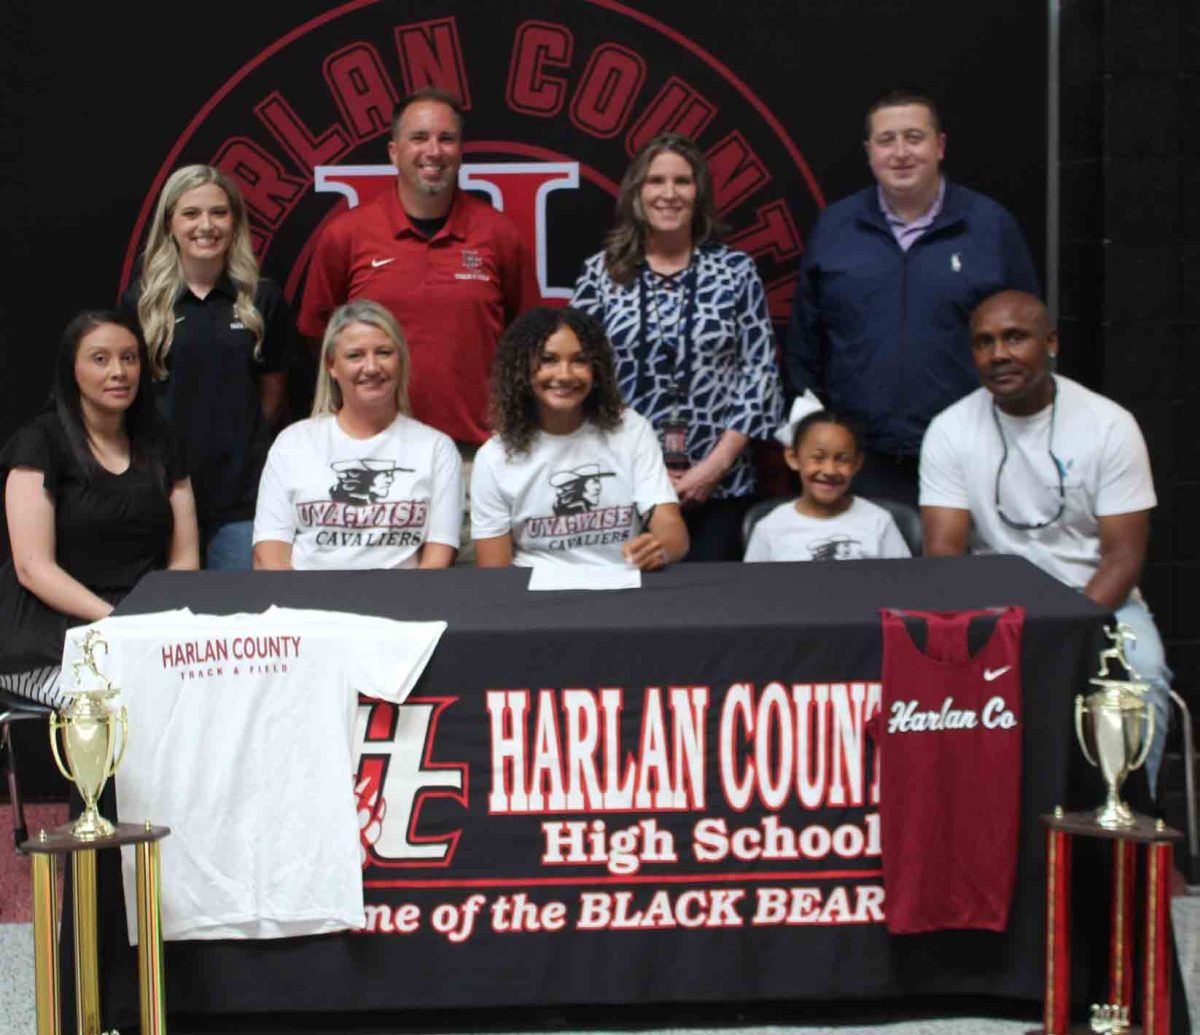 Harlan County senior Paige Phillips with the University of Virginia-Wise to continue her athletic and academic career. Pictured with Phillips are, from left, front row: and Jerry Phillips; back row: assistant coach Abby Vitatoe, coach Ryan Vitatoe, HCHS Principal Kathy Napier and athletic director Eugene Farmer.